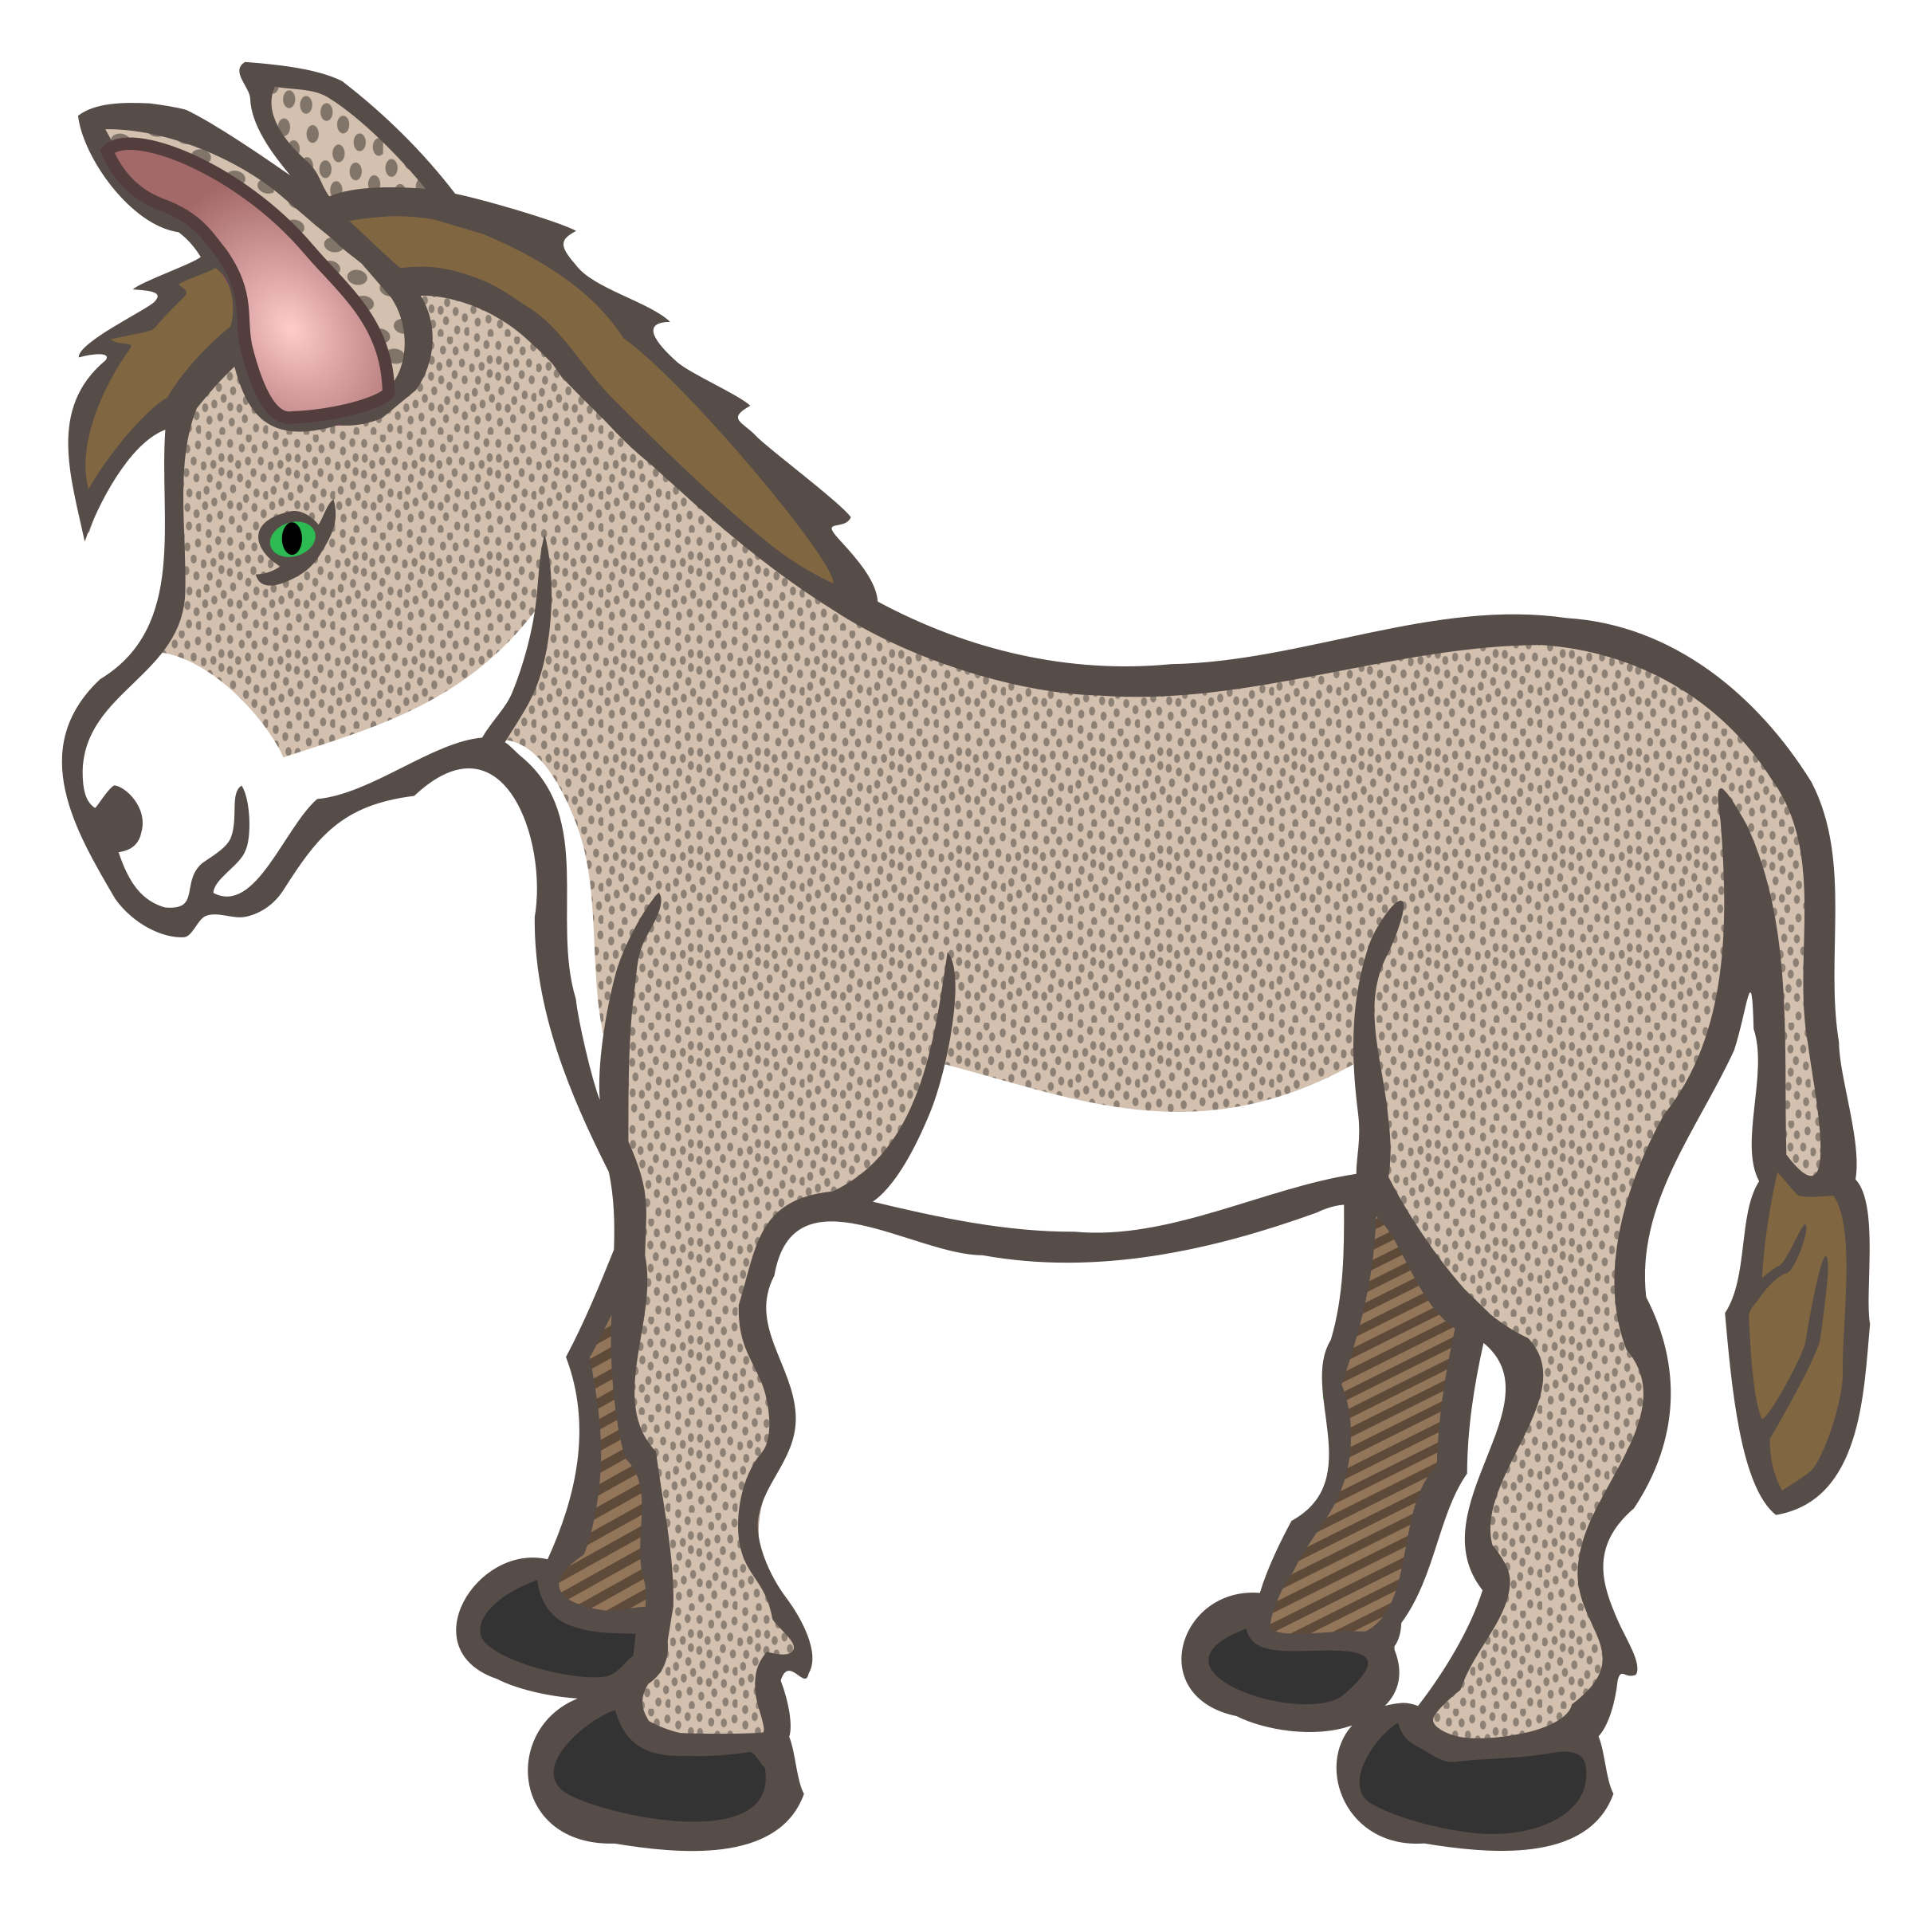 Morning clipart cold. Donkey resolution x px